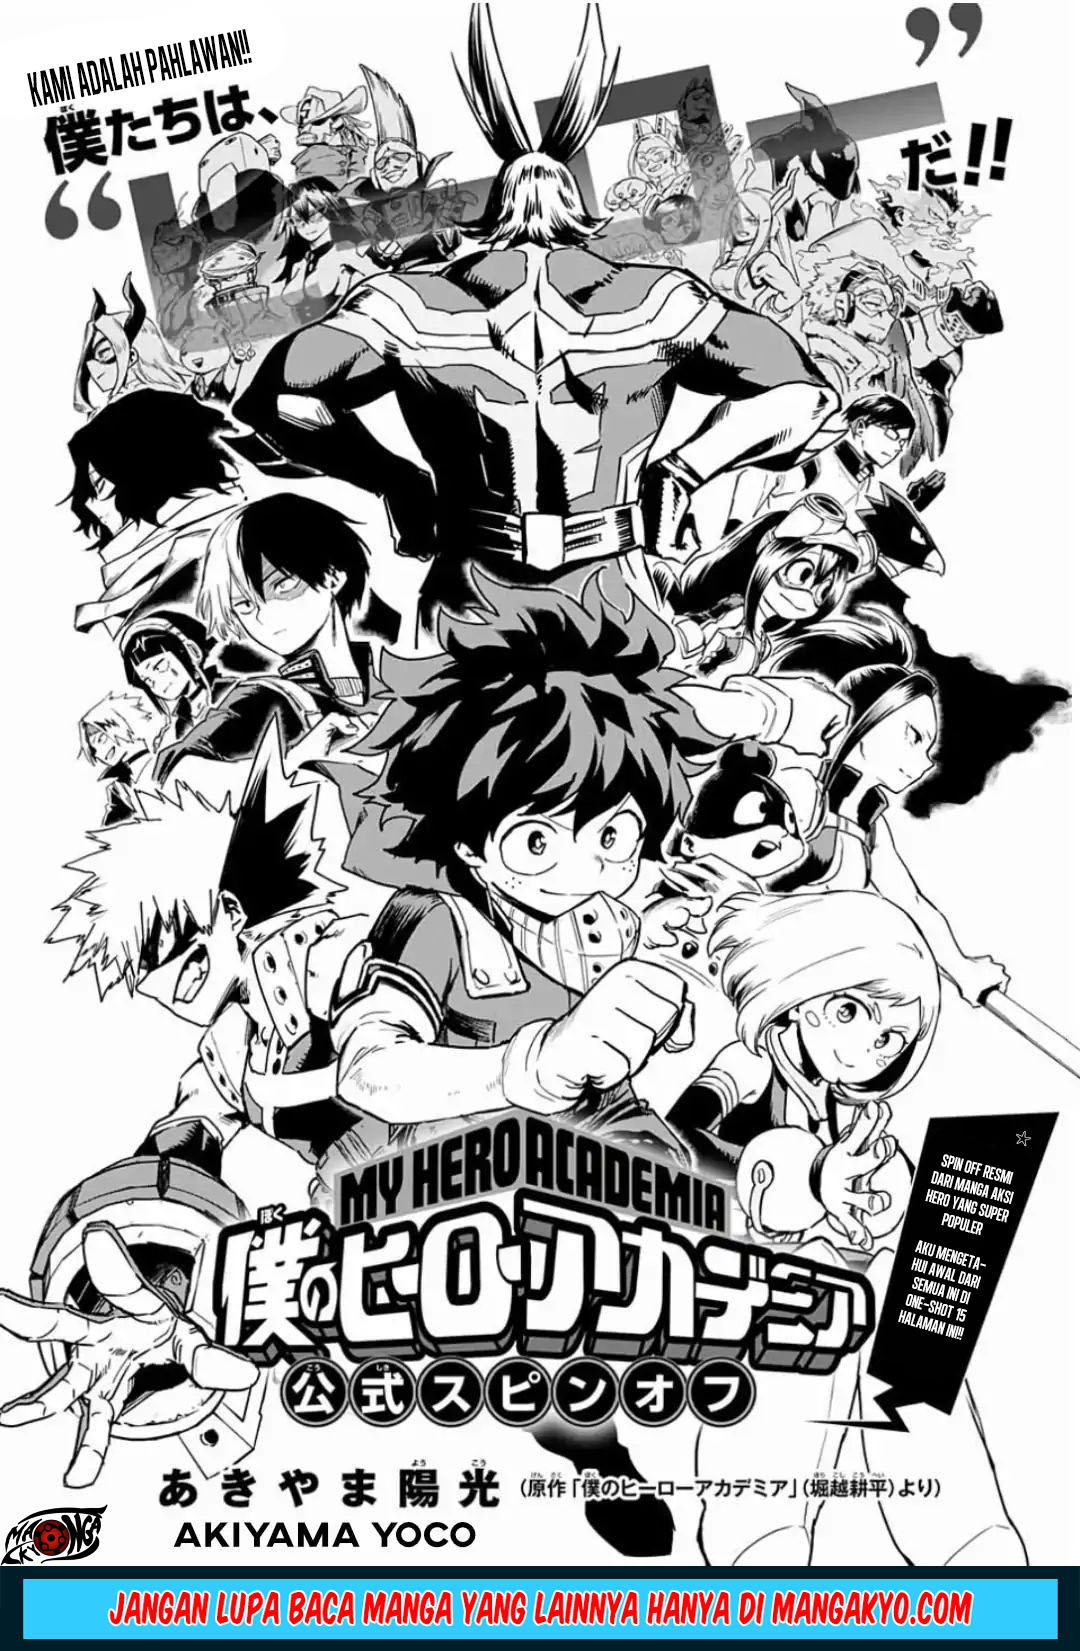 Boku no Hero Academia Team Up Mission Chapter 01